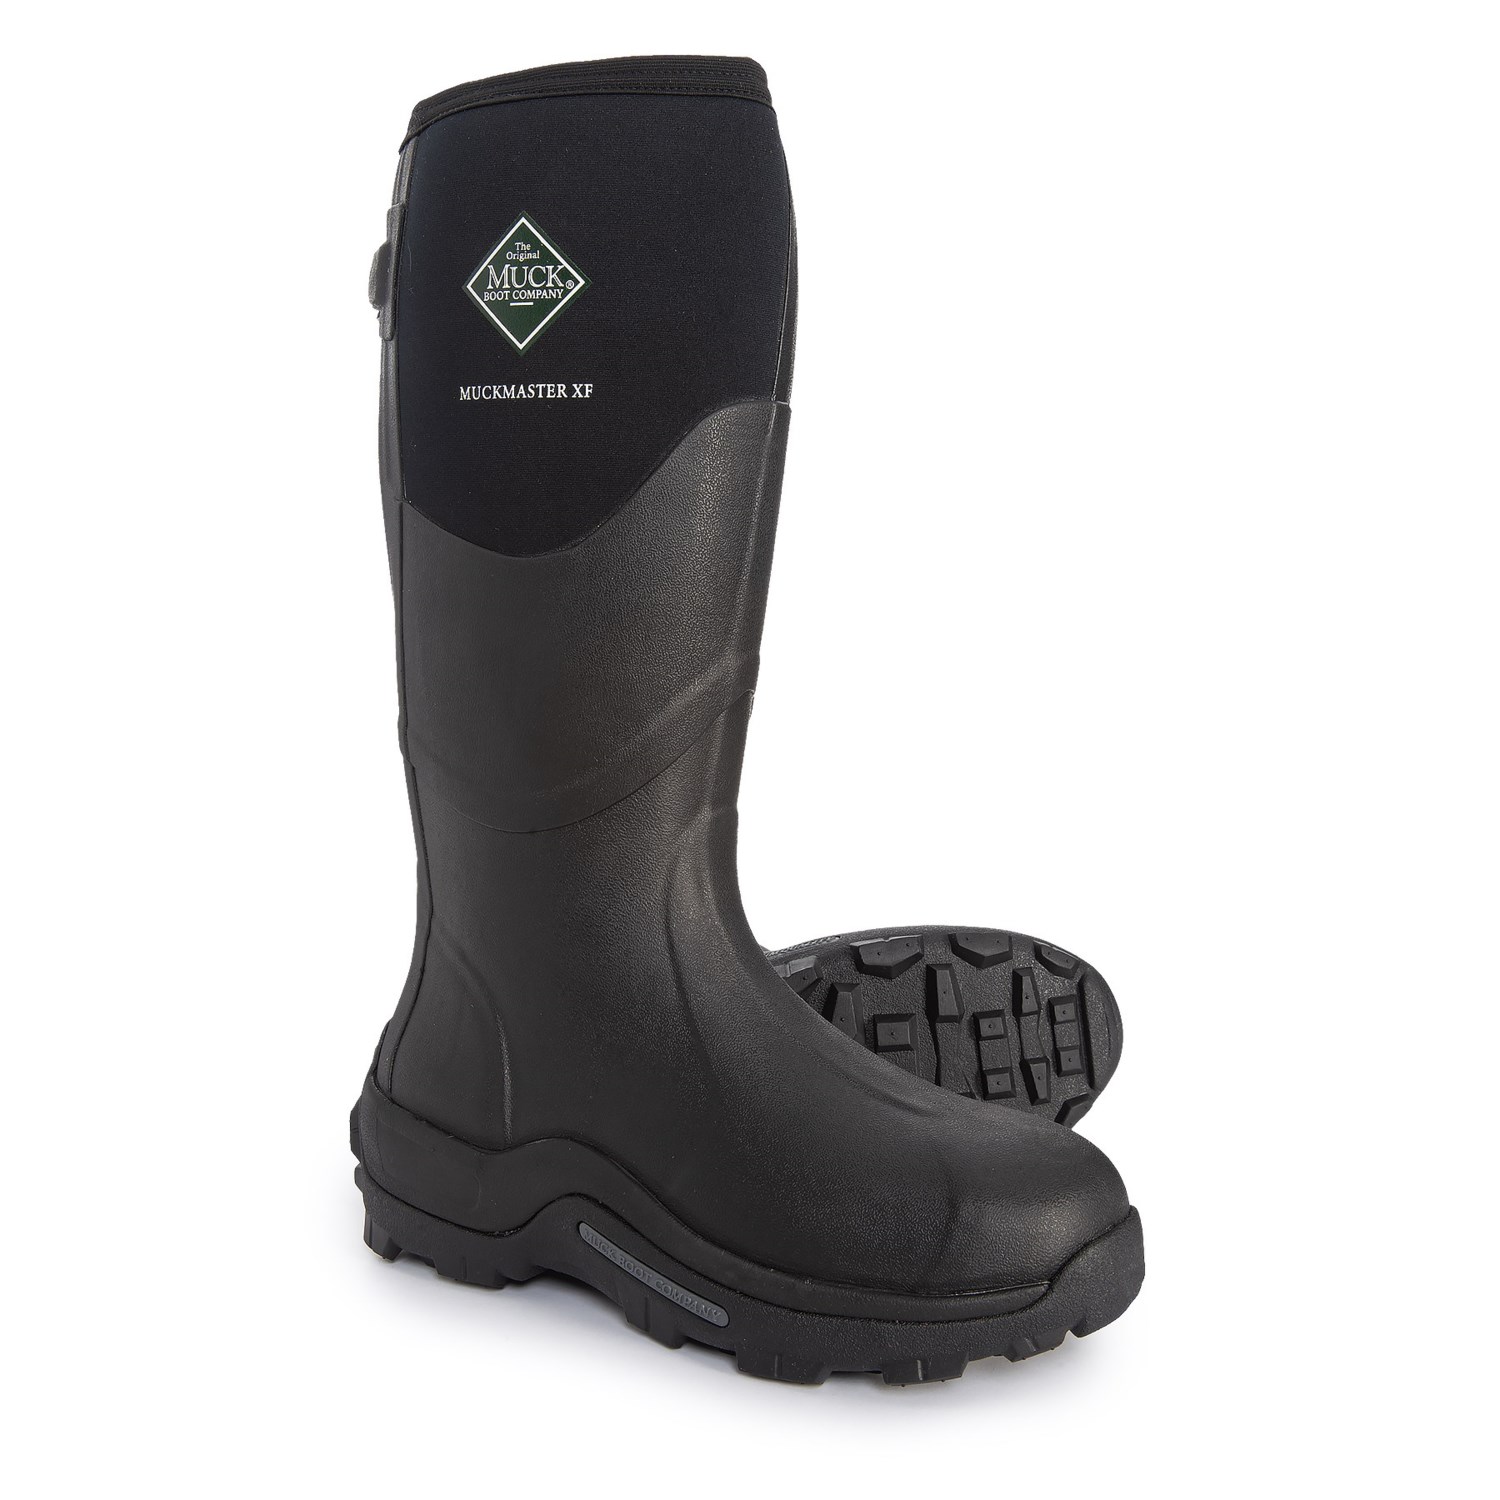 Muck Boot Company Muckmaster Extended Fit Basic Boots – Waterproof ...